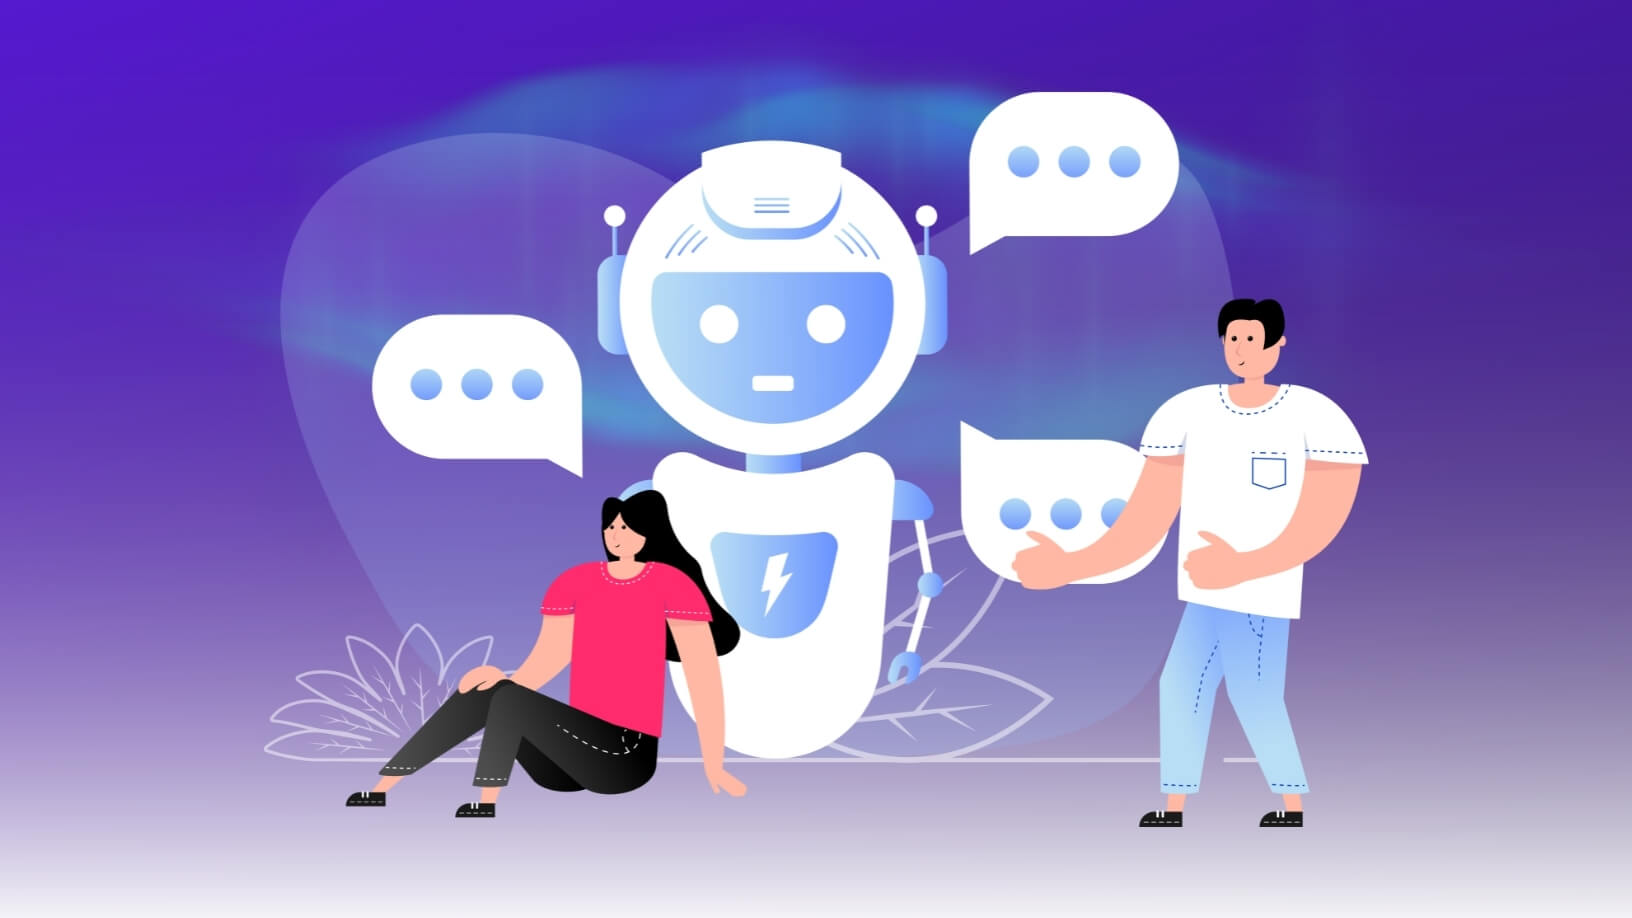 Text Chatbots - Everything You Need to Know